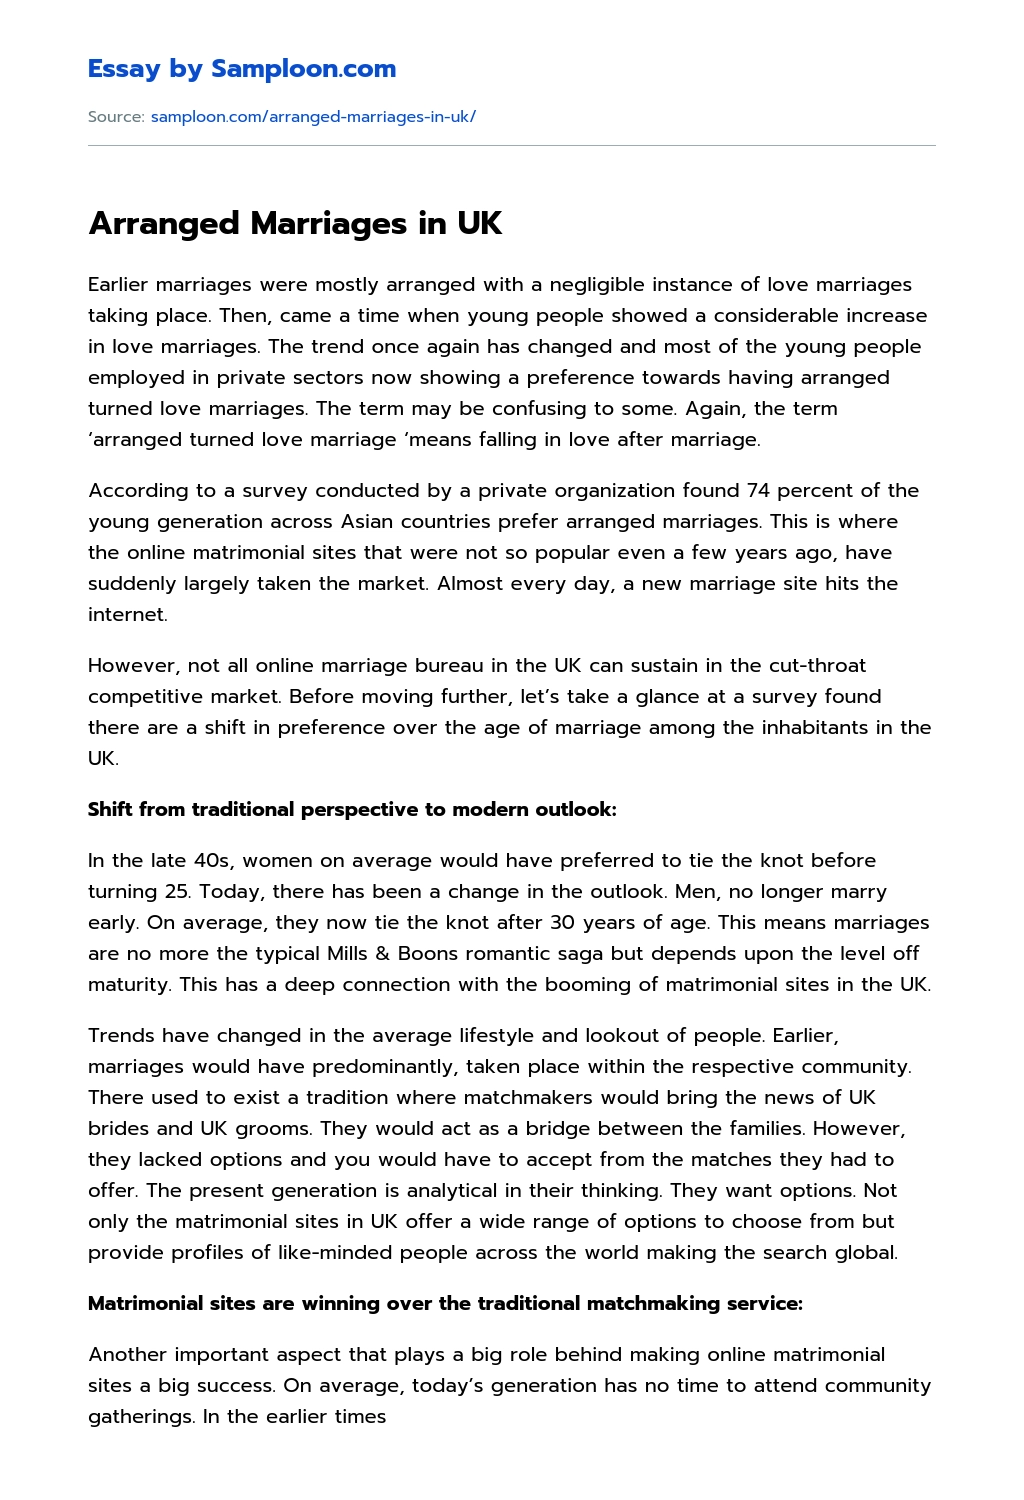 Arranged Marriages in UK essay